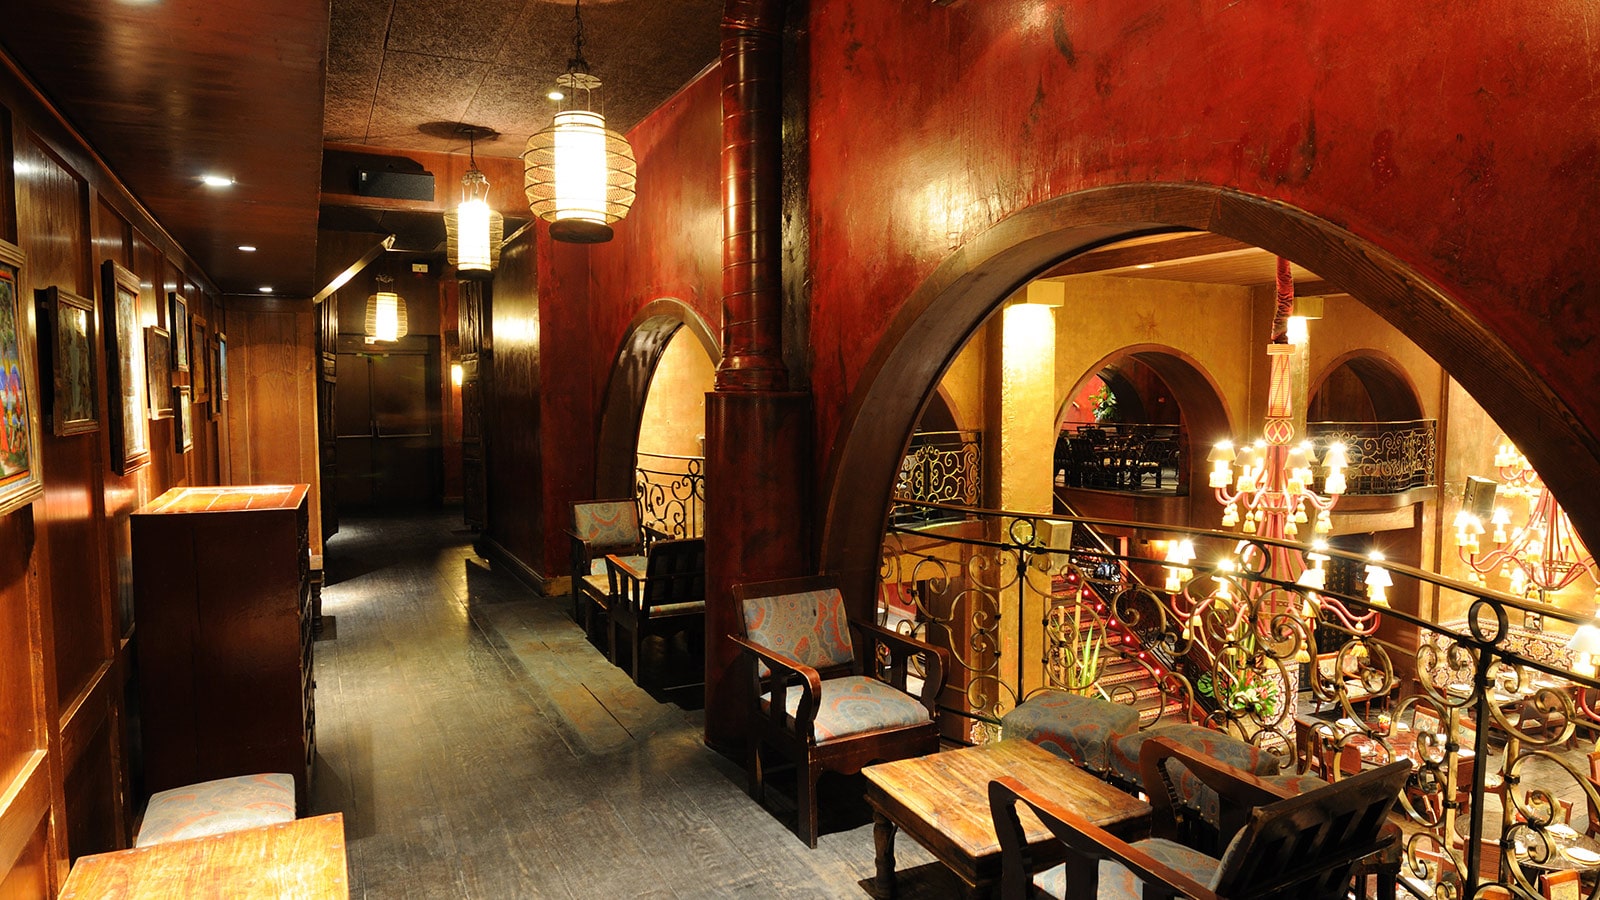 Meyer Sound Upgrade Caters to Worldly Ambience at Flagship Buddha-Bar Paris